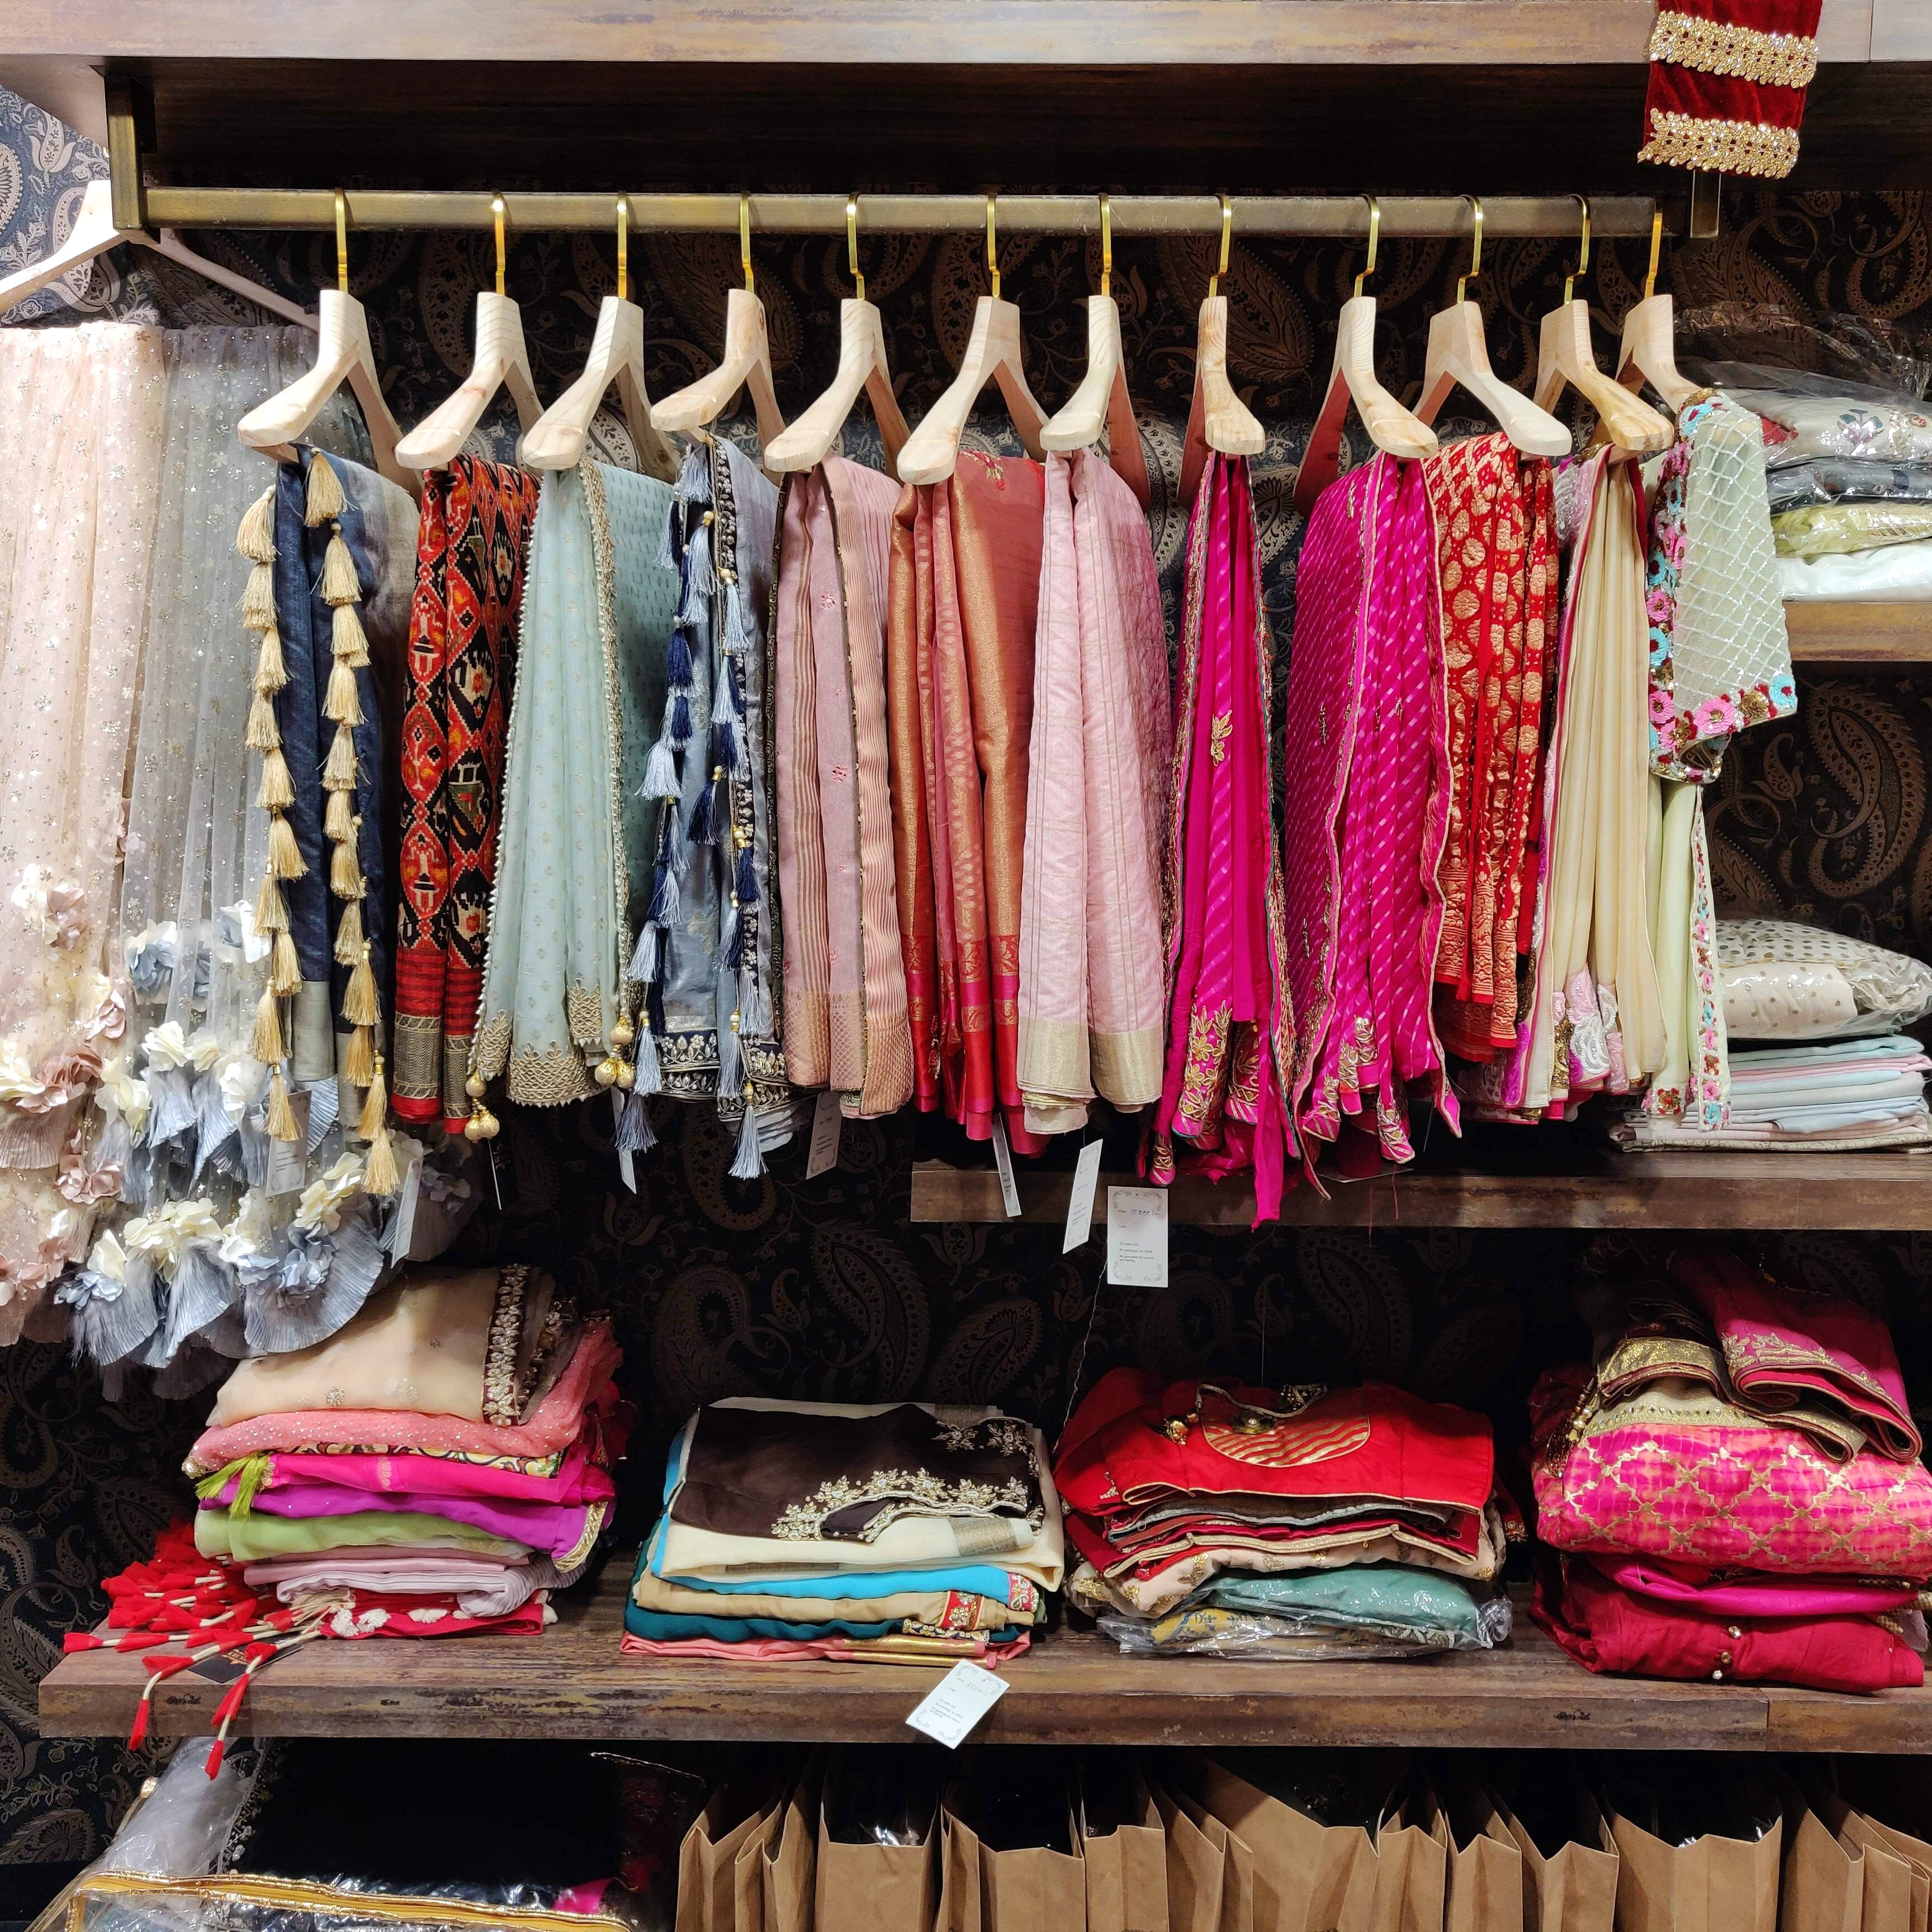 Best Bridal Stores in Pune